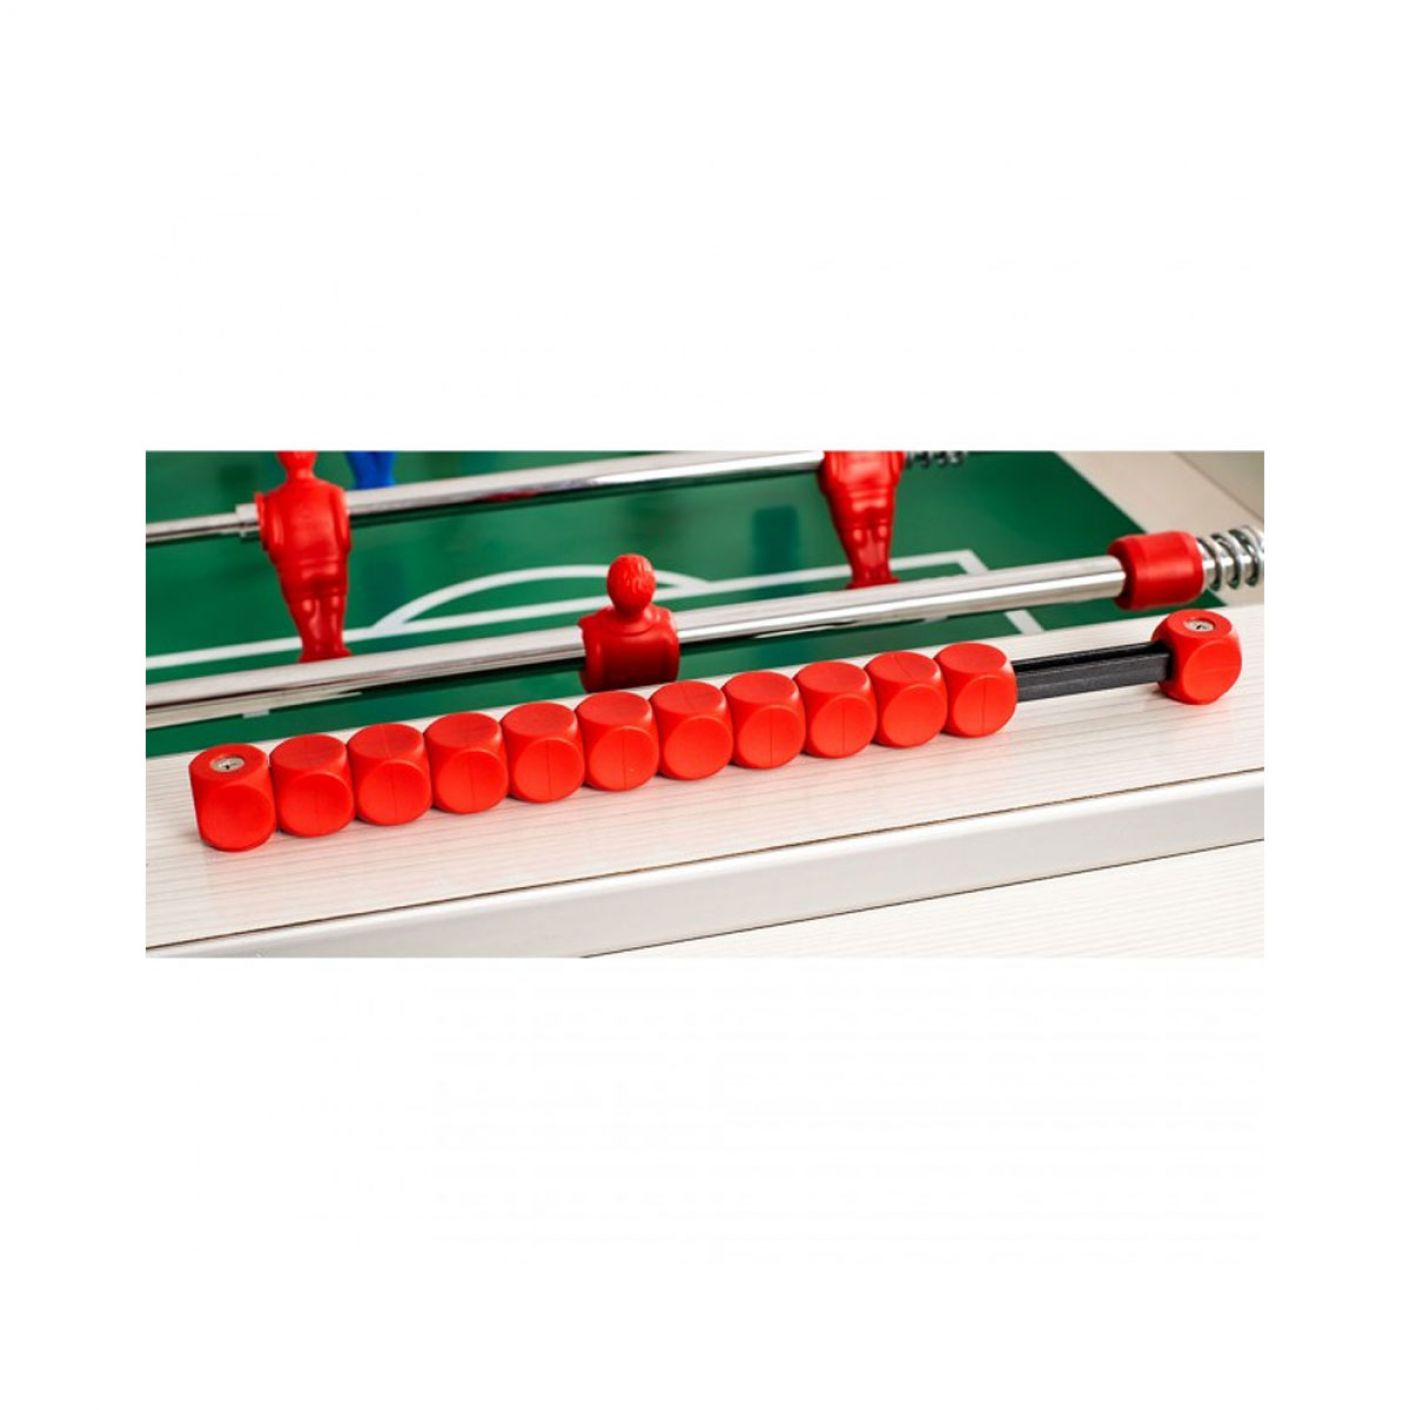 Garlando Football Table G-500 Weatherproof white with retracting temples